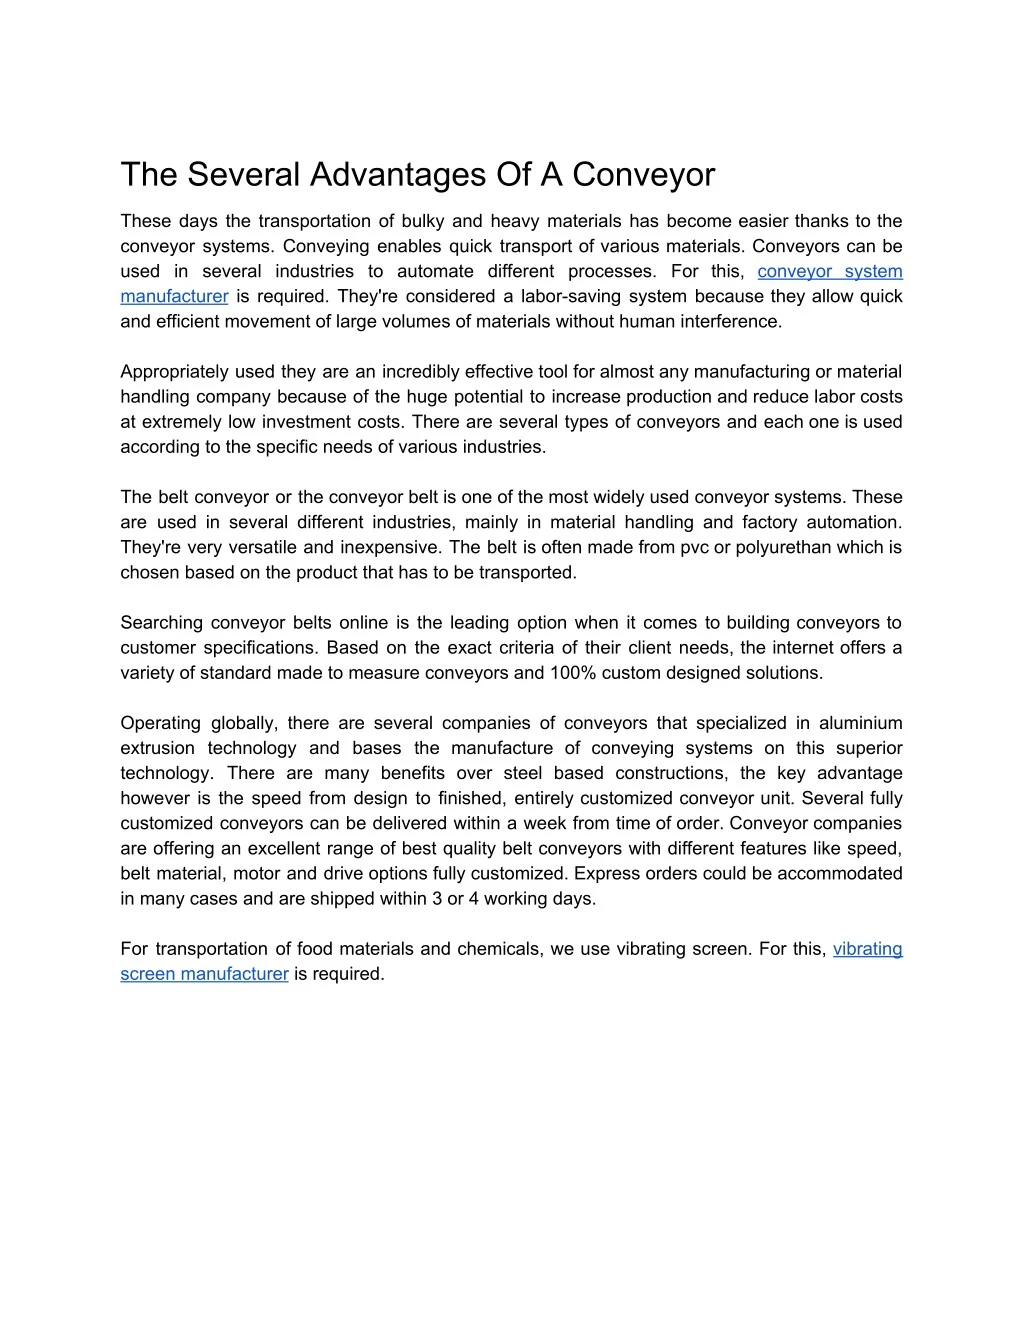 the several advantages of a conveyor